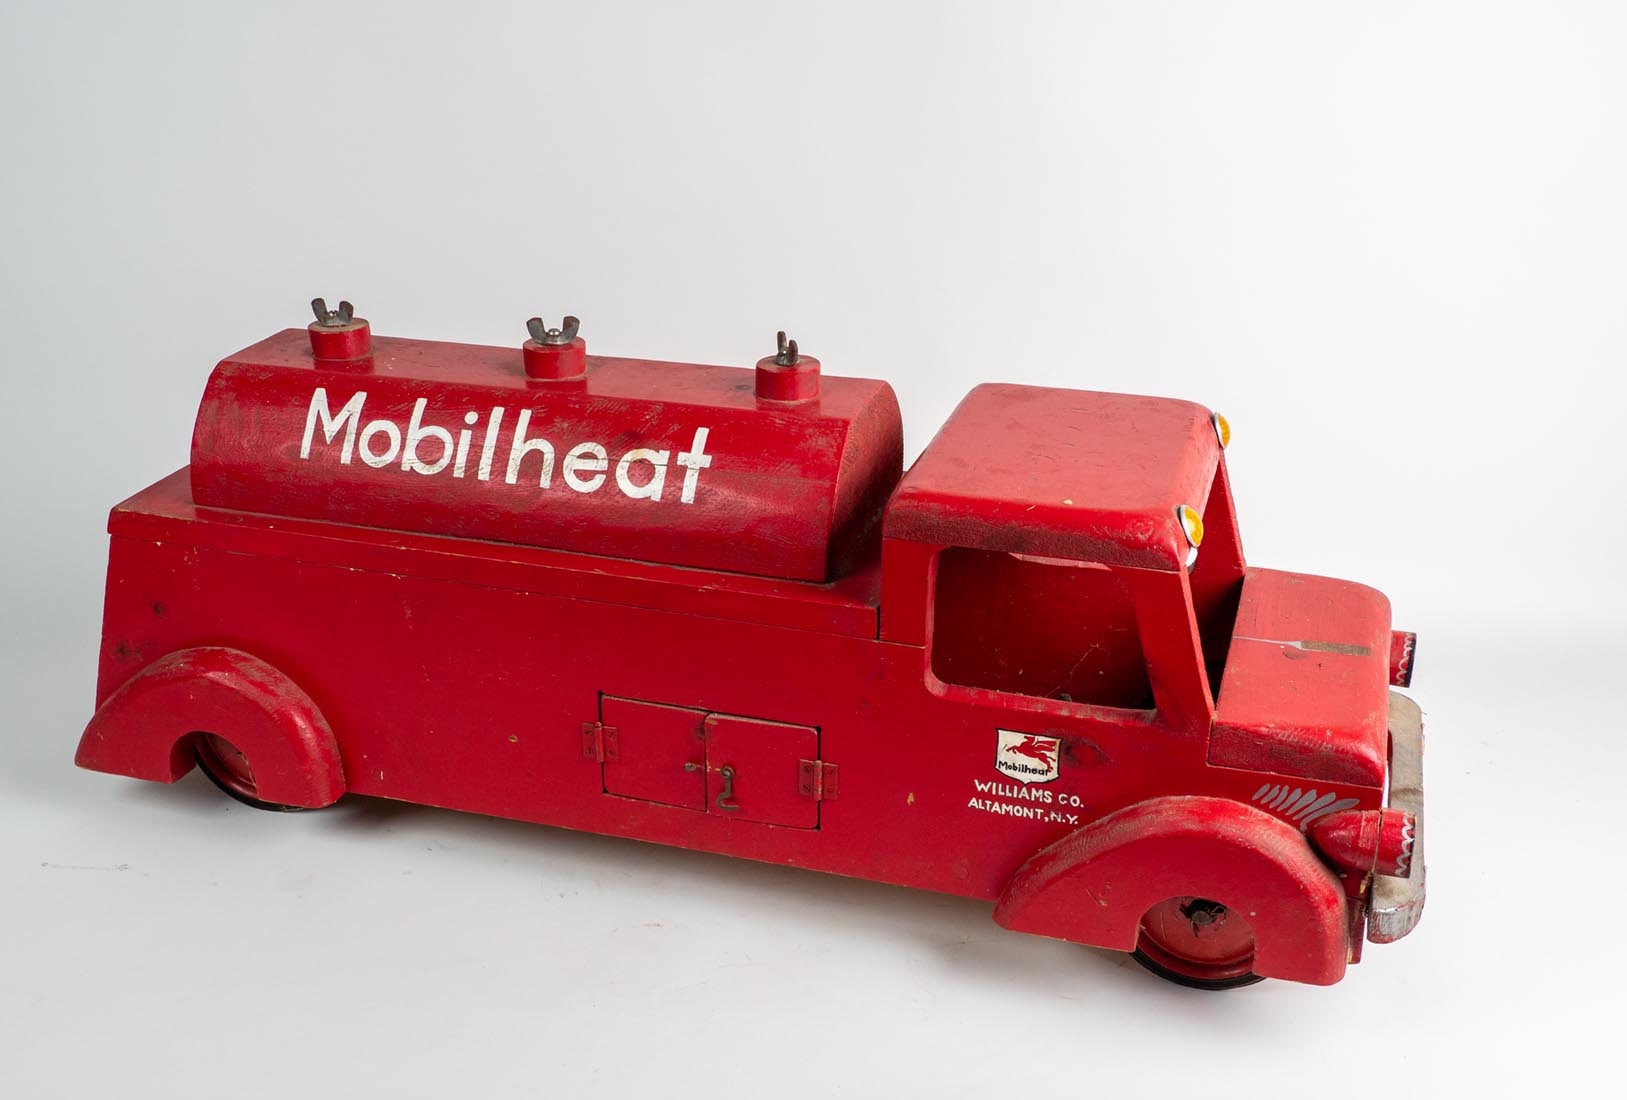 Toy Fuel Delivery Truck sculpture by Marjorie White Williams